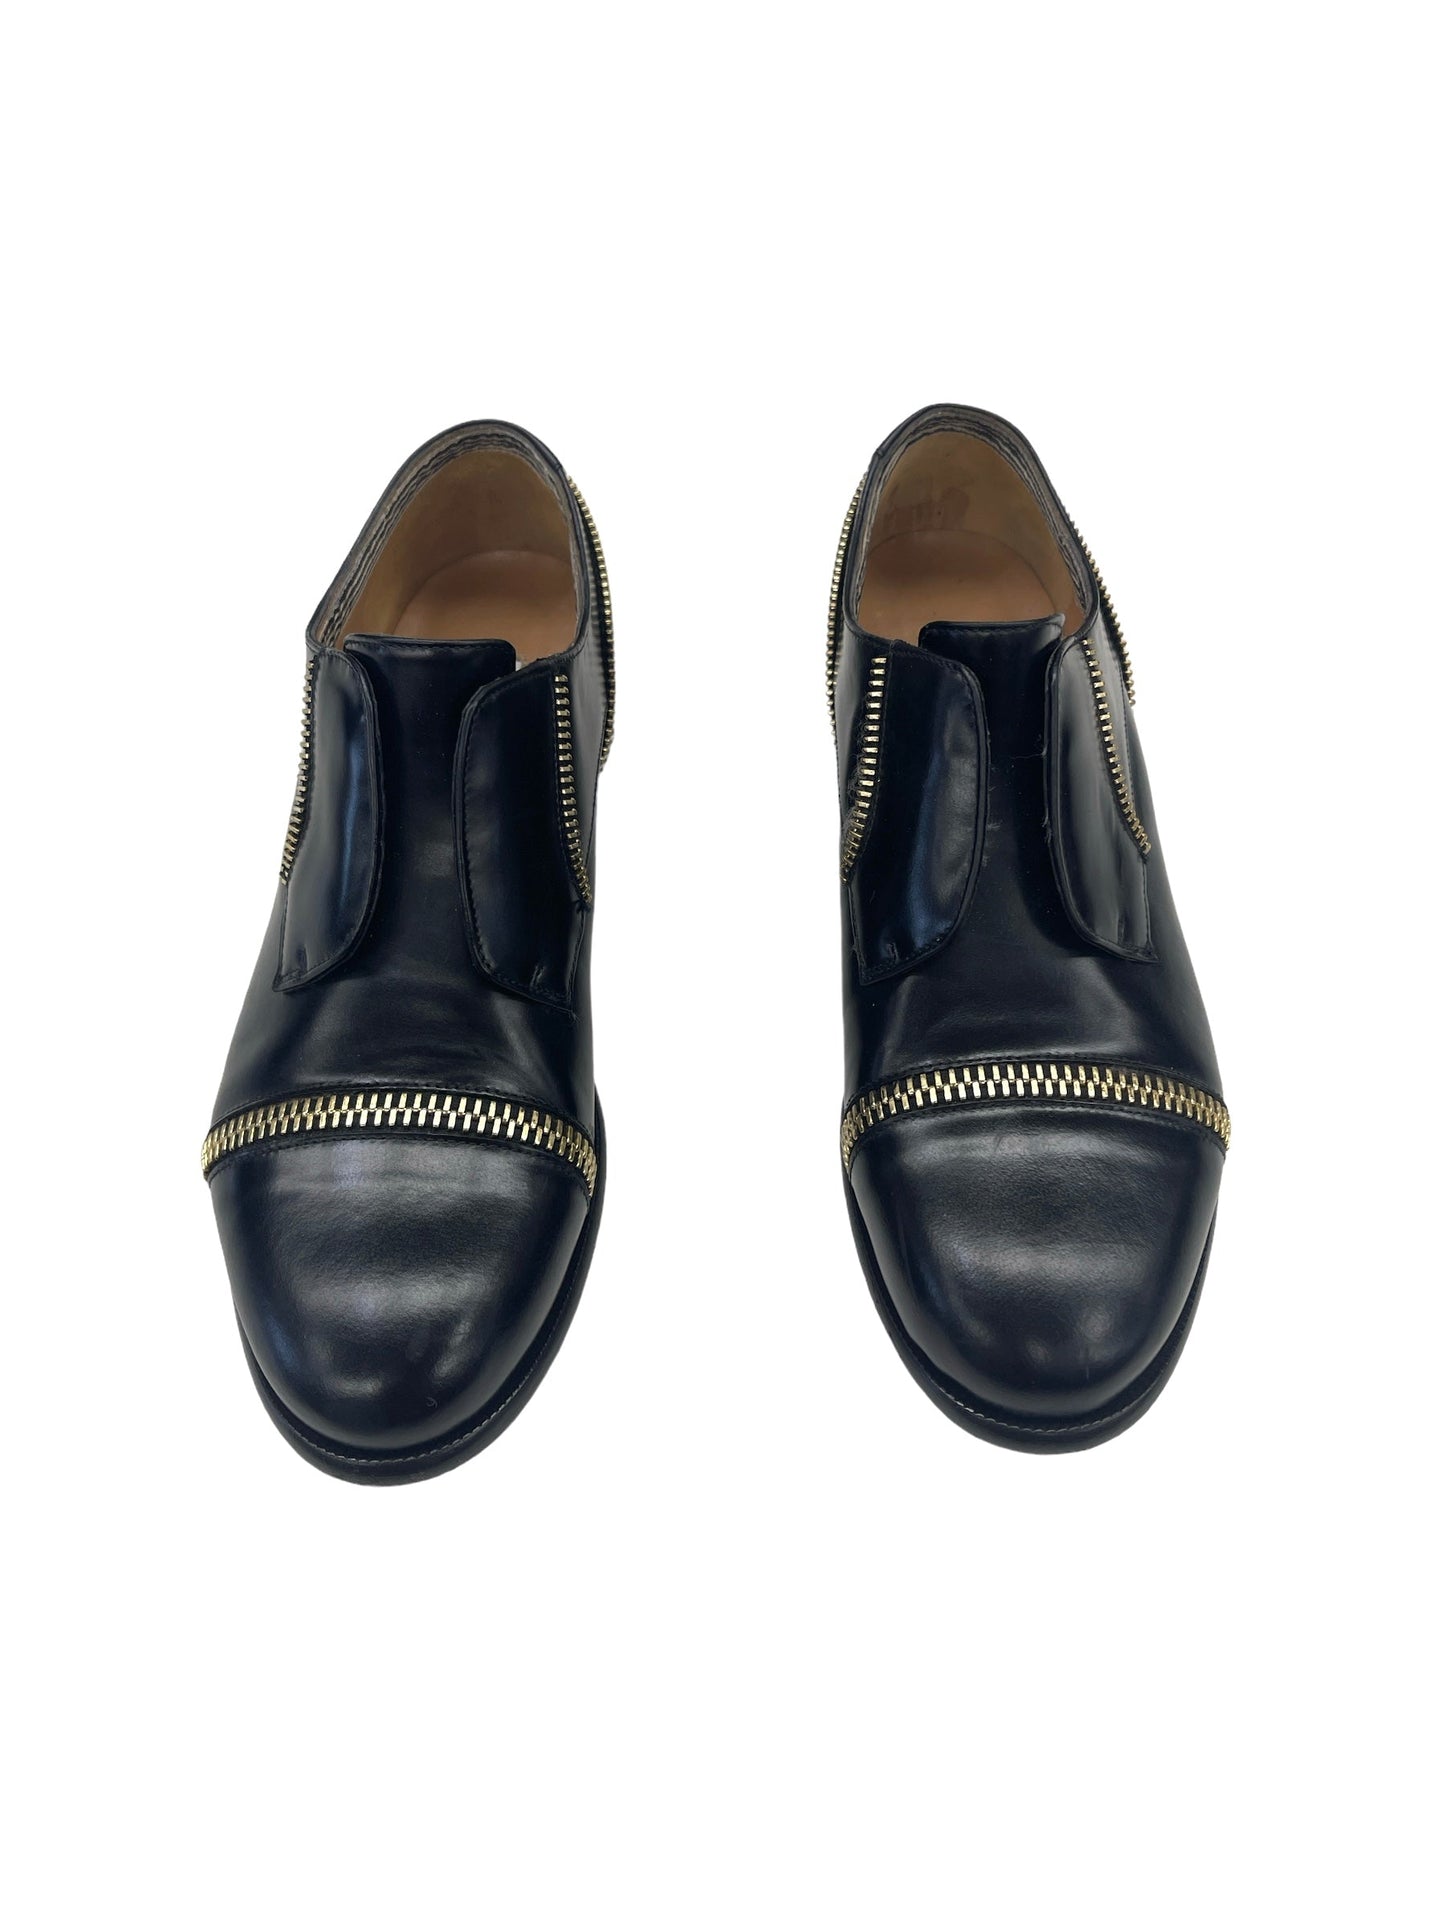 Shoes Flats Loafer Oxford By Fratelli Rossetti